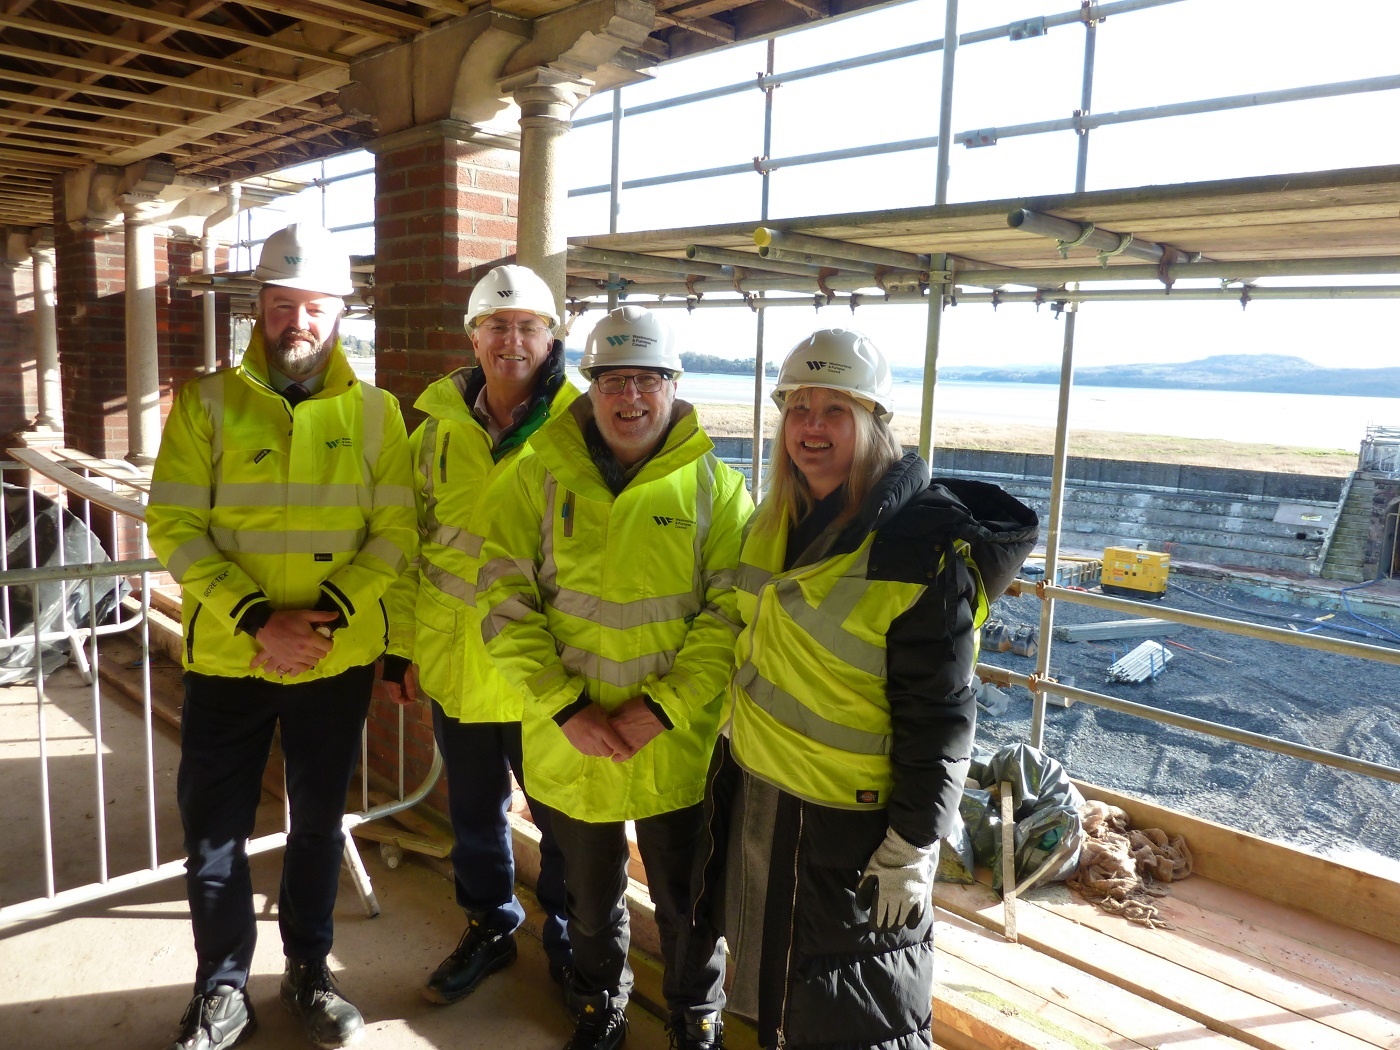 Allan Harty, Assistant Director of Corporate Assets, Fleet and Capital Programme; Council Leader Cllr Jonathan Brook; Cllr Peter Thornton, Cabinet Member for Highways and Assets; and Steph Cordon, Director of Thriving Communities, in the central pavilion.